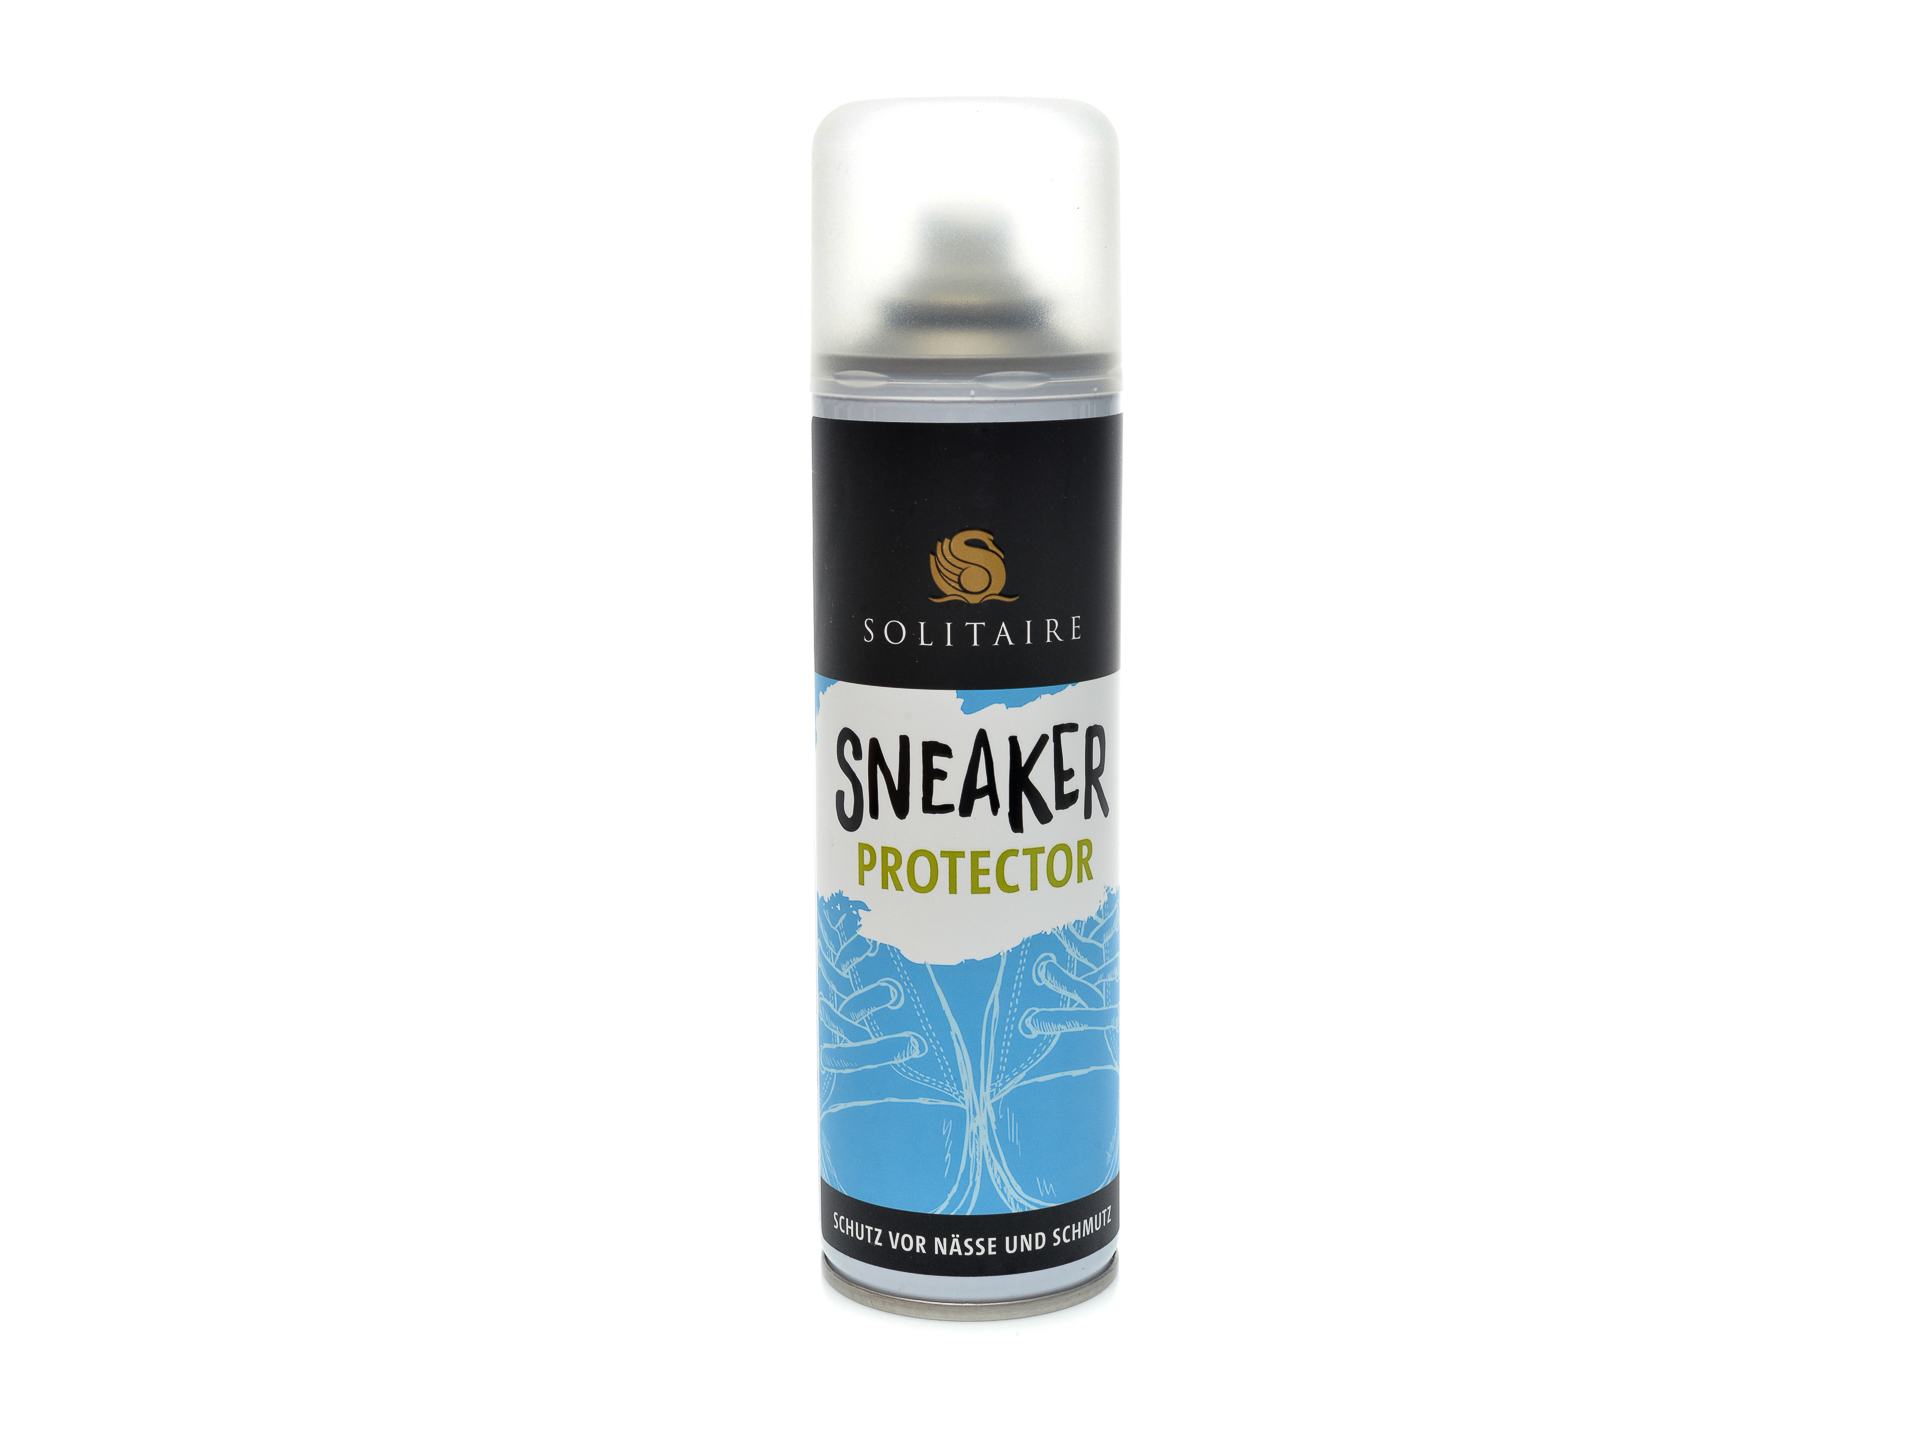 PR Spray sneaker protector, Solitaire otter.ro imagine 2022 13clothing.ro